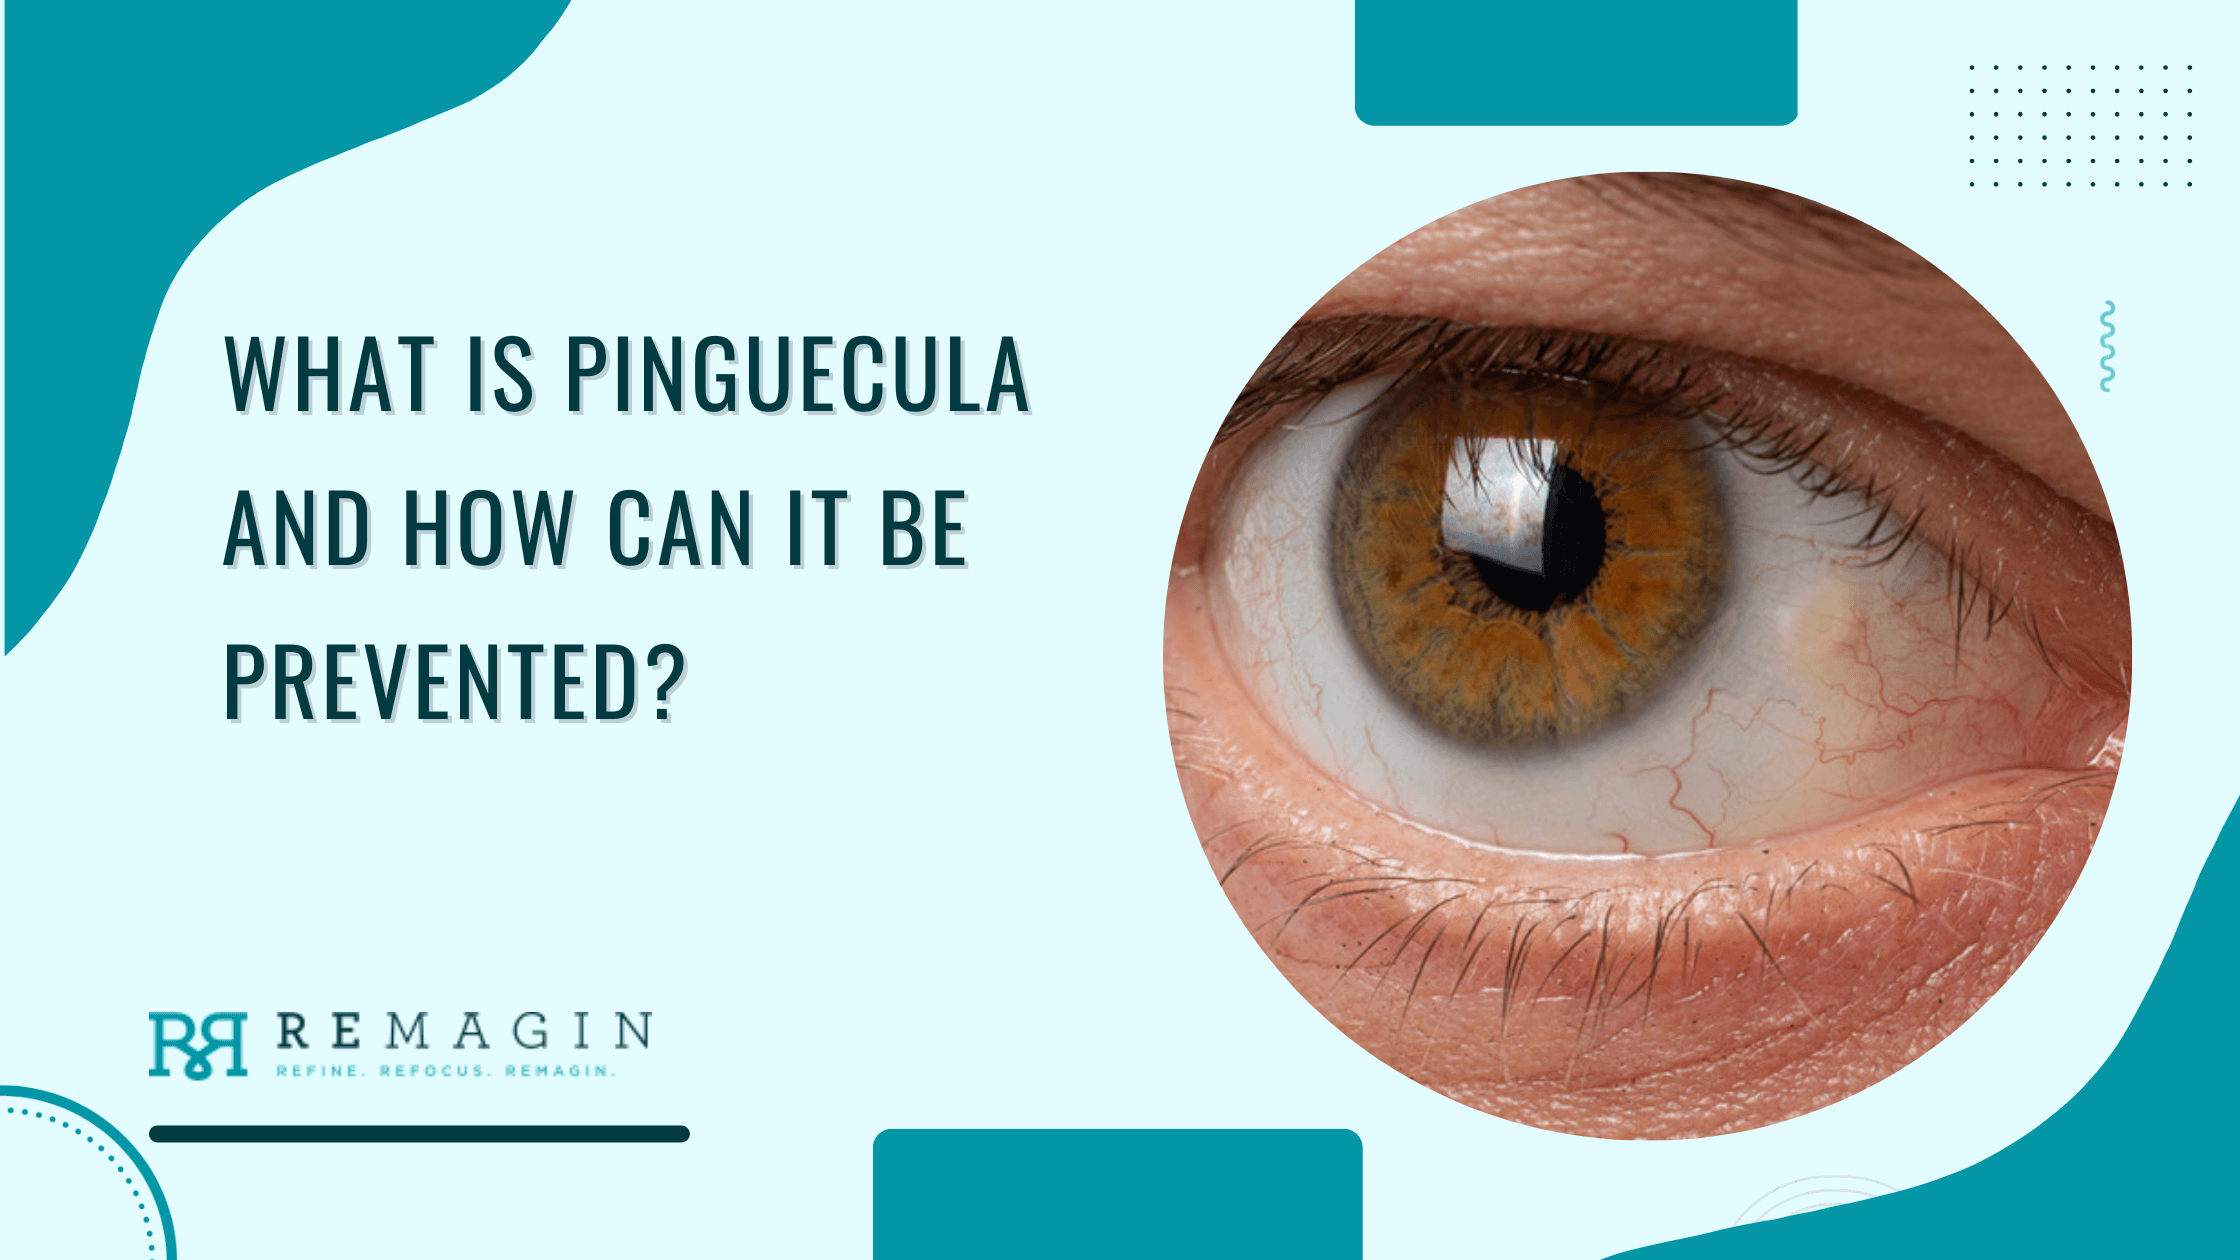 What Is Pinguecula and How Can It Be Prevented?